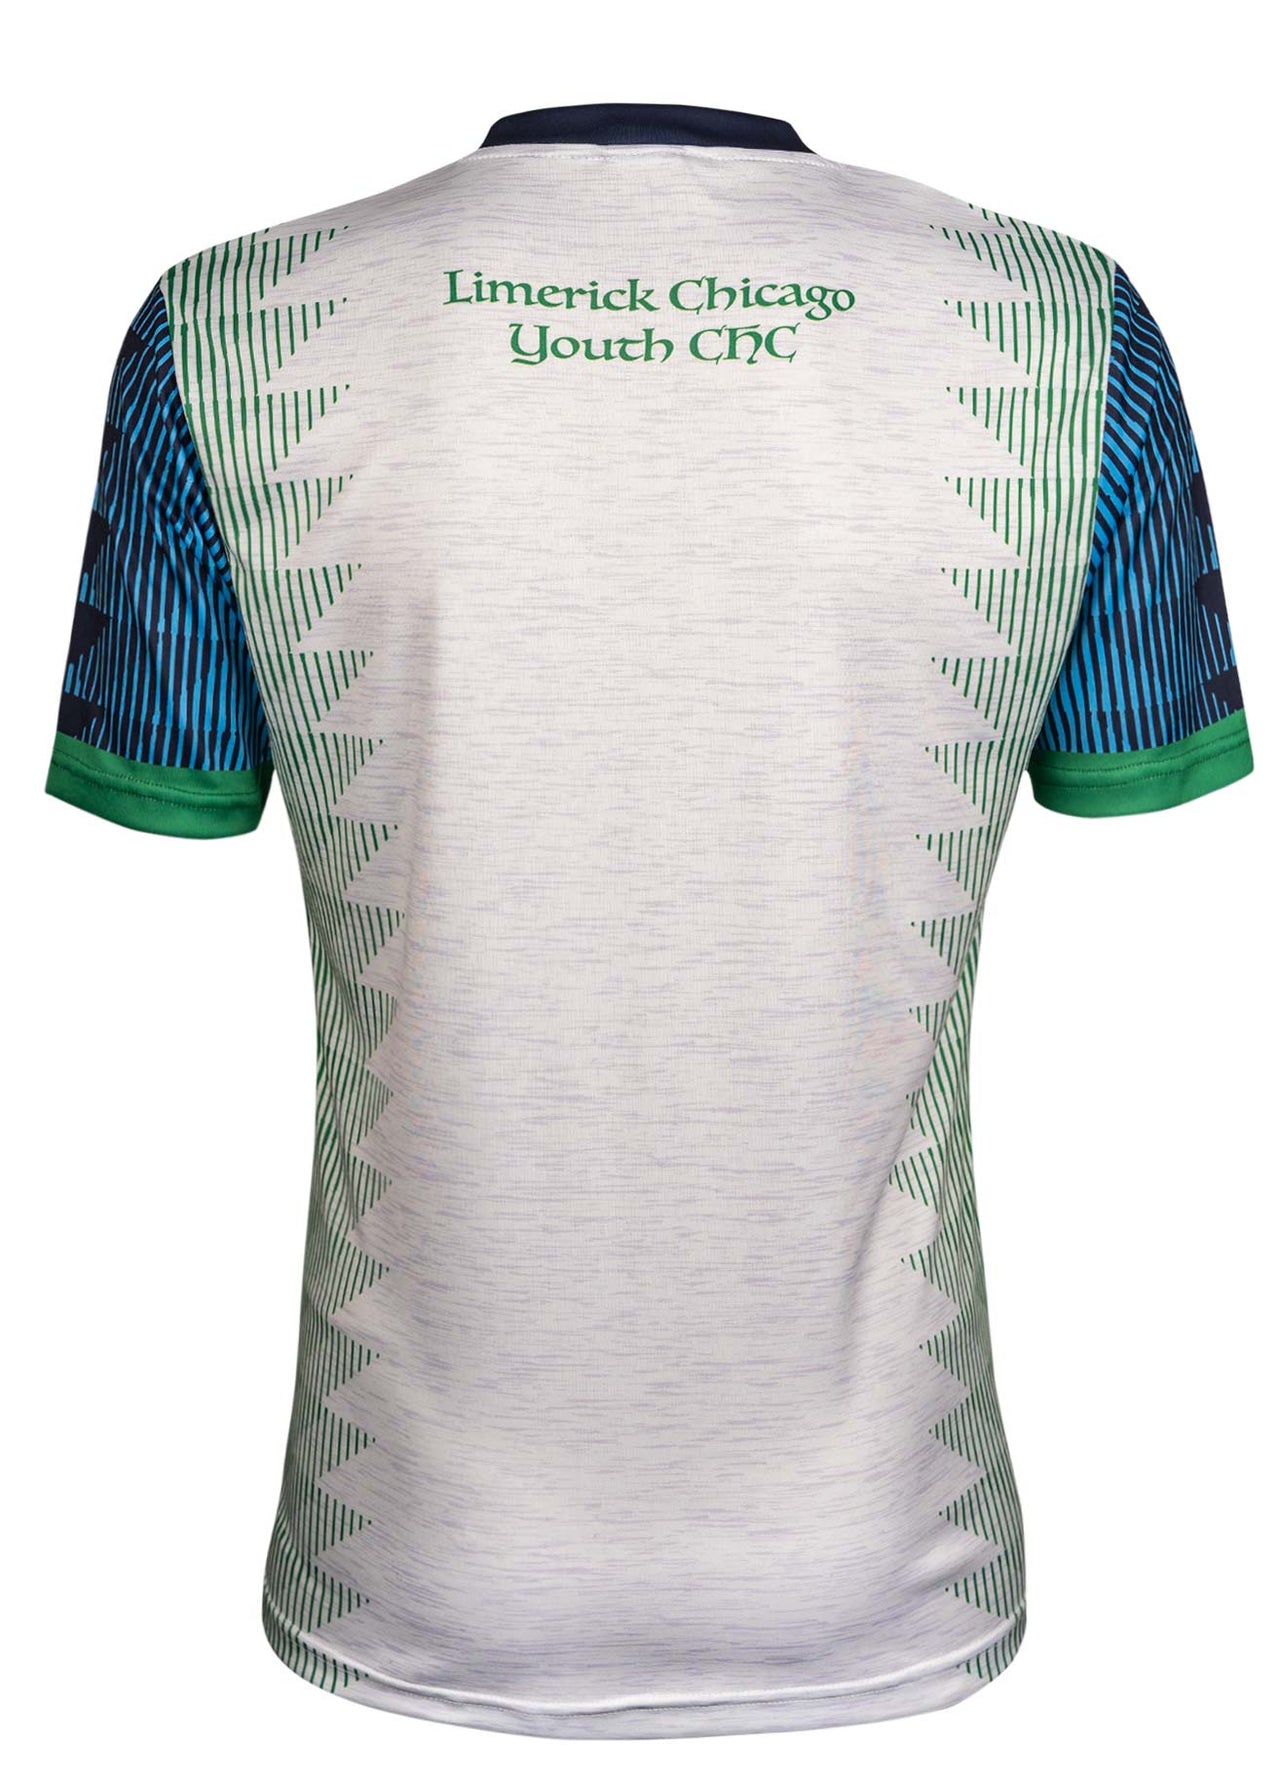 Limerick Chicago Youth Training Jersey Regular Fit Adult